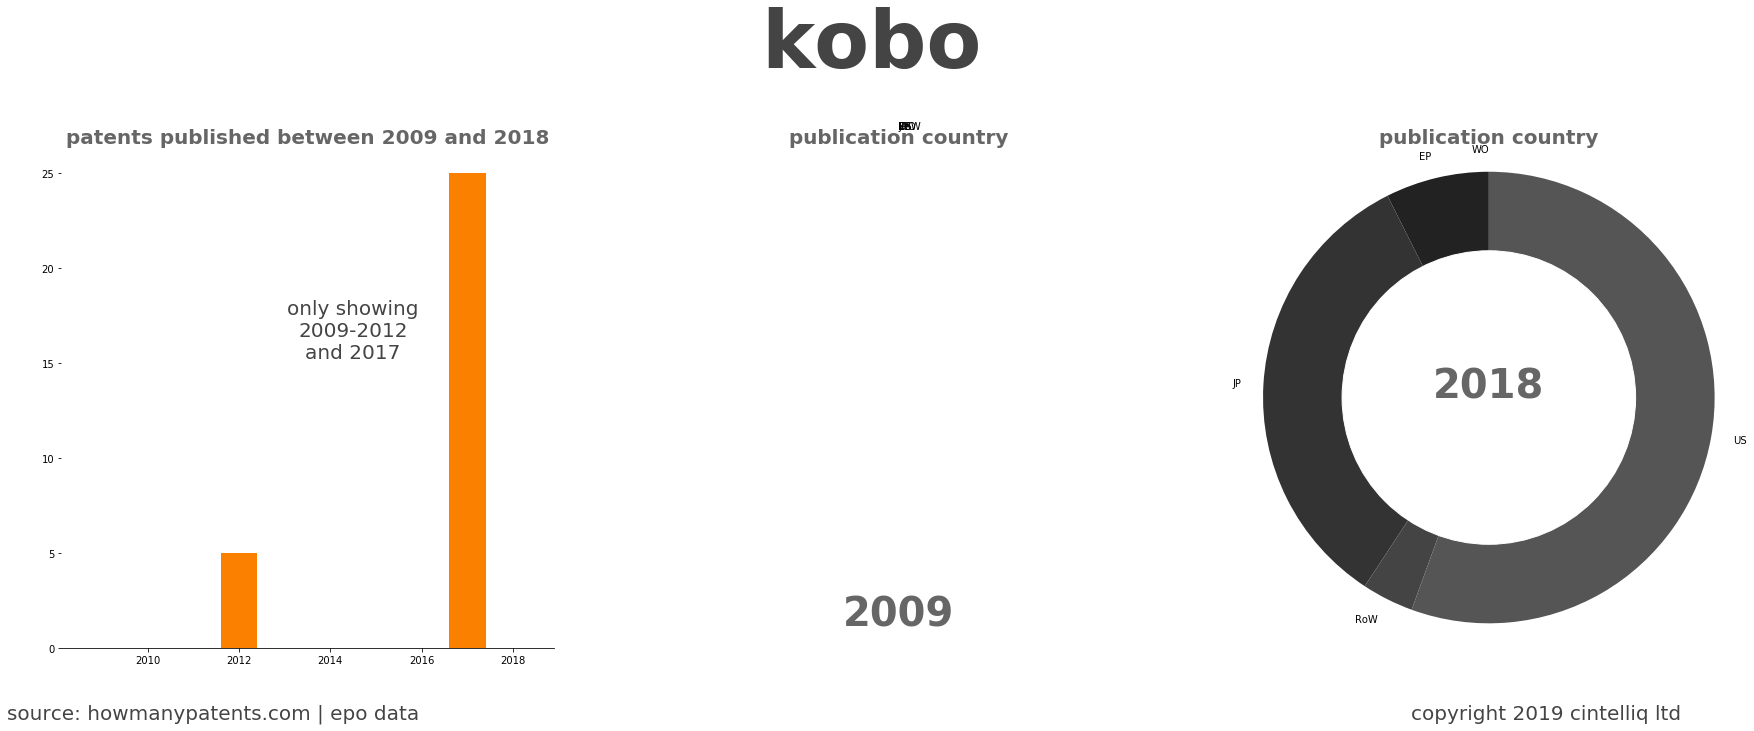 summary of patents for Kobo